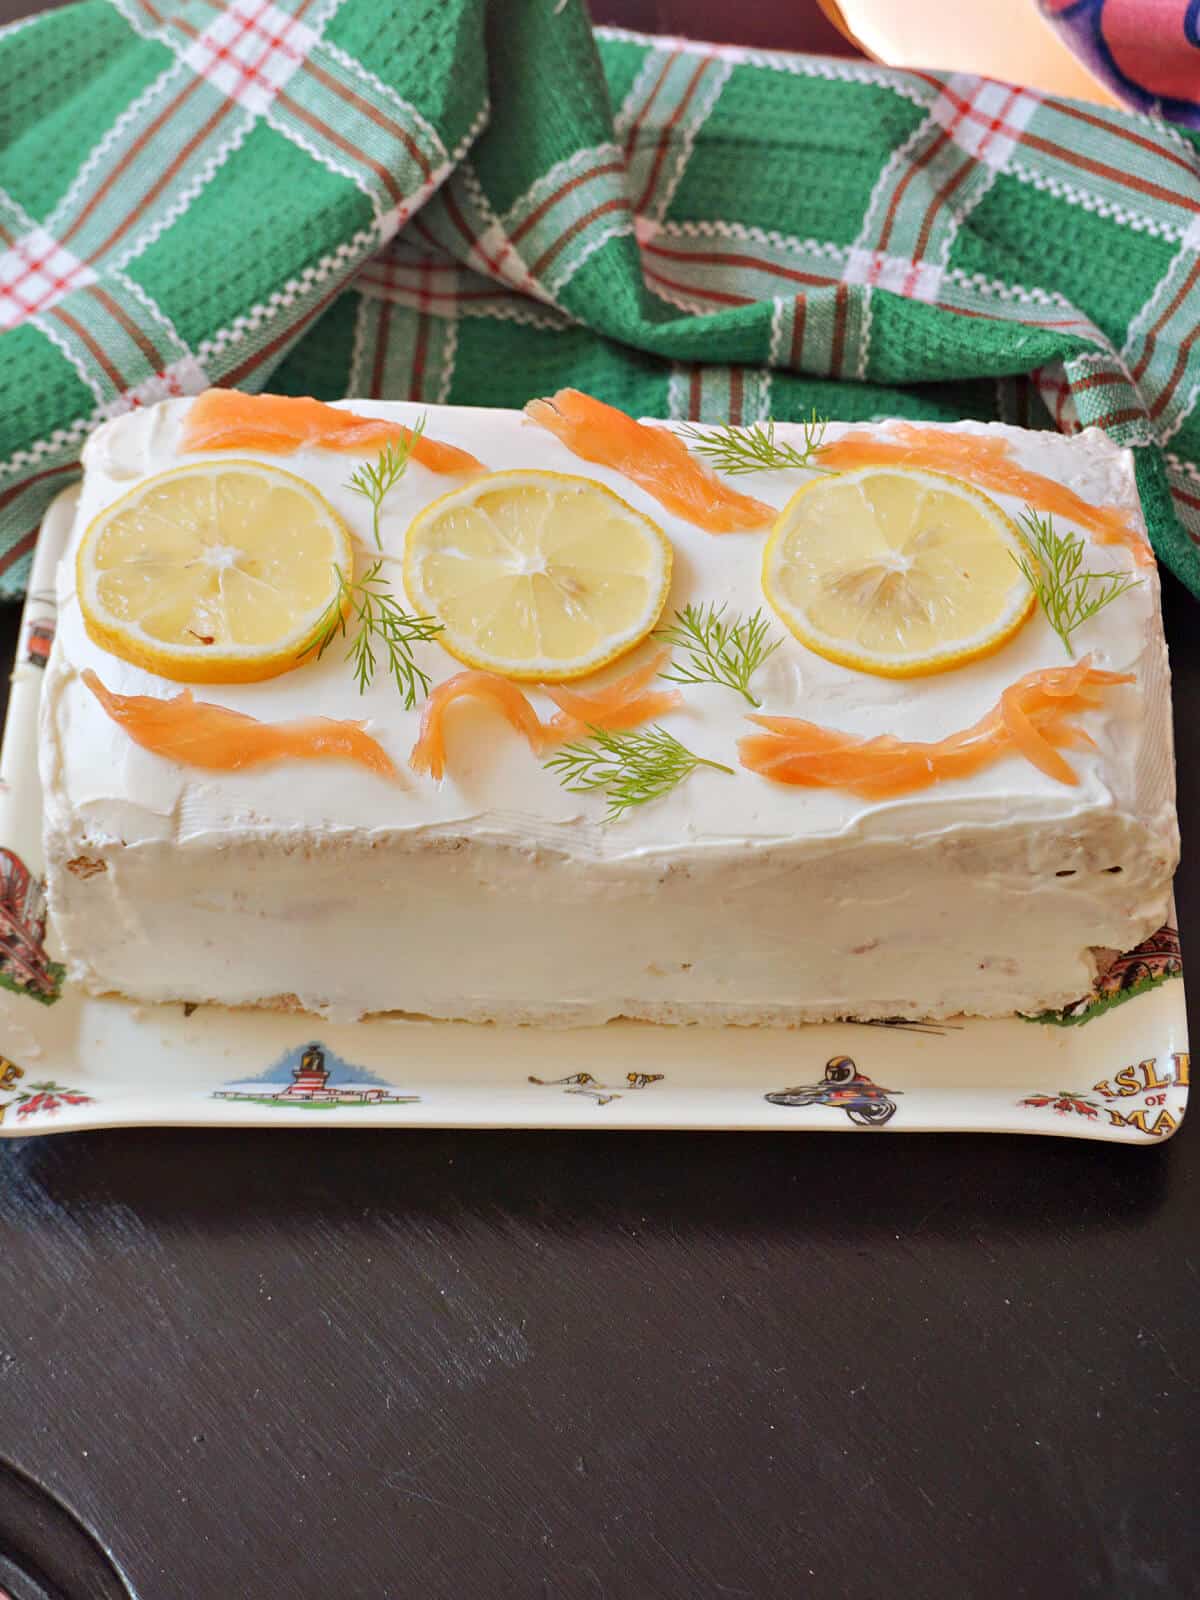 A sandwich cake on a serving tray